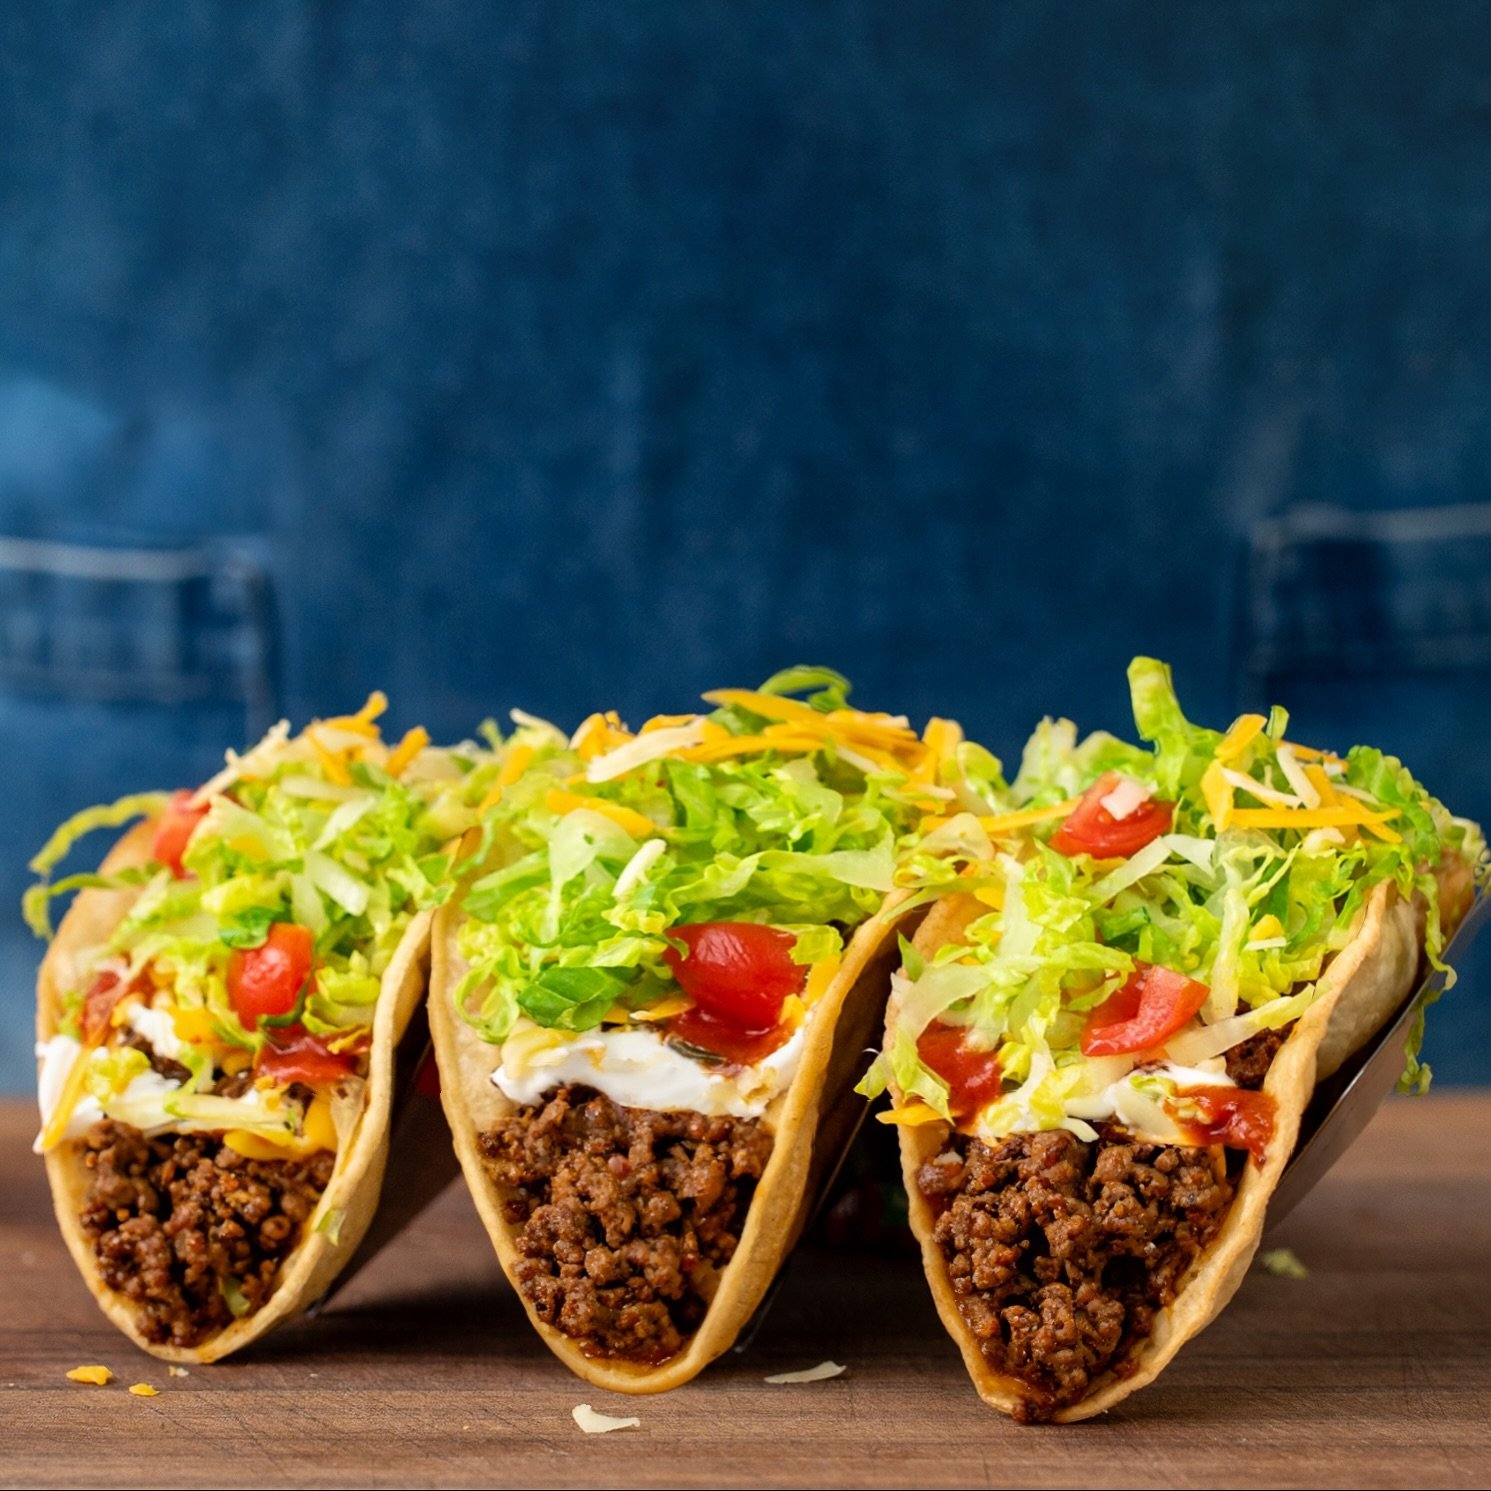 It&rsquo;s hard to express with words how incredible these crunchy ground beef tacos are. What I can say is I make this simple crowd pleaser for friends often and it hits EVERY time. Frying your own shells and creating your own spice mix just takes t